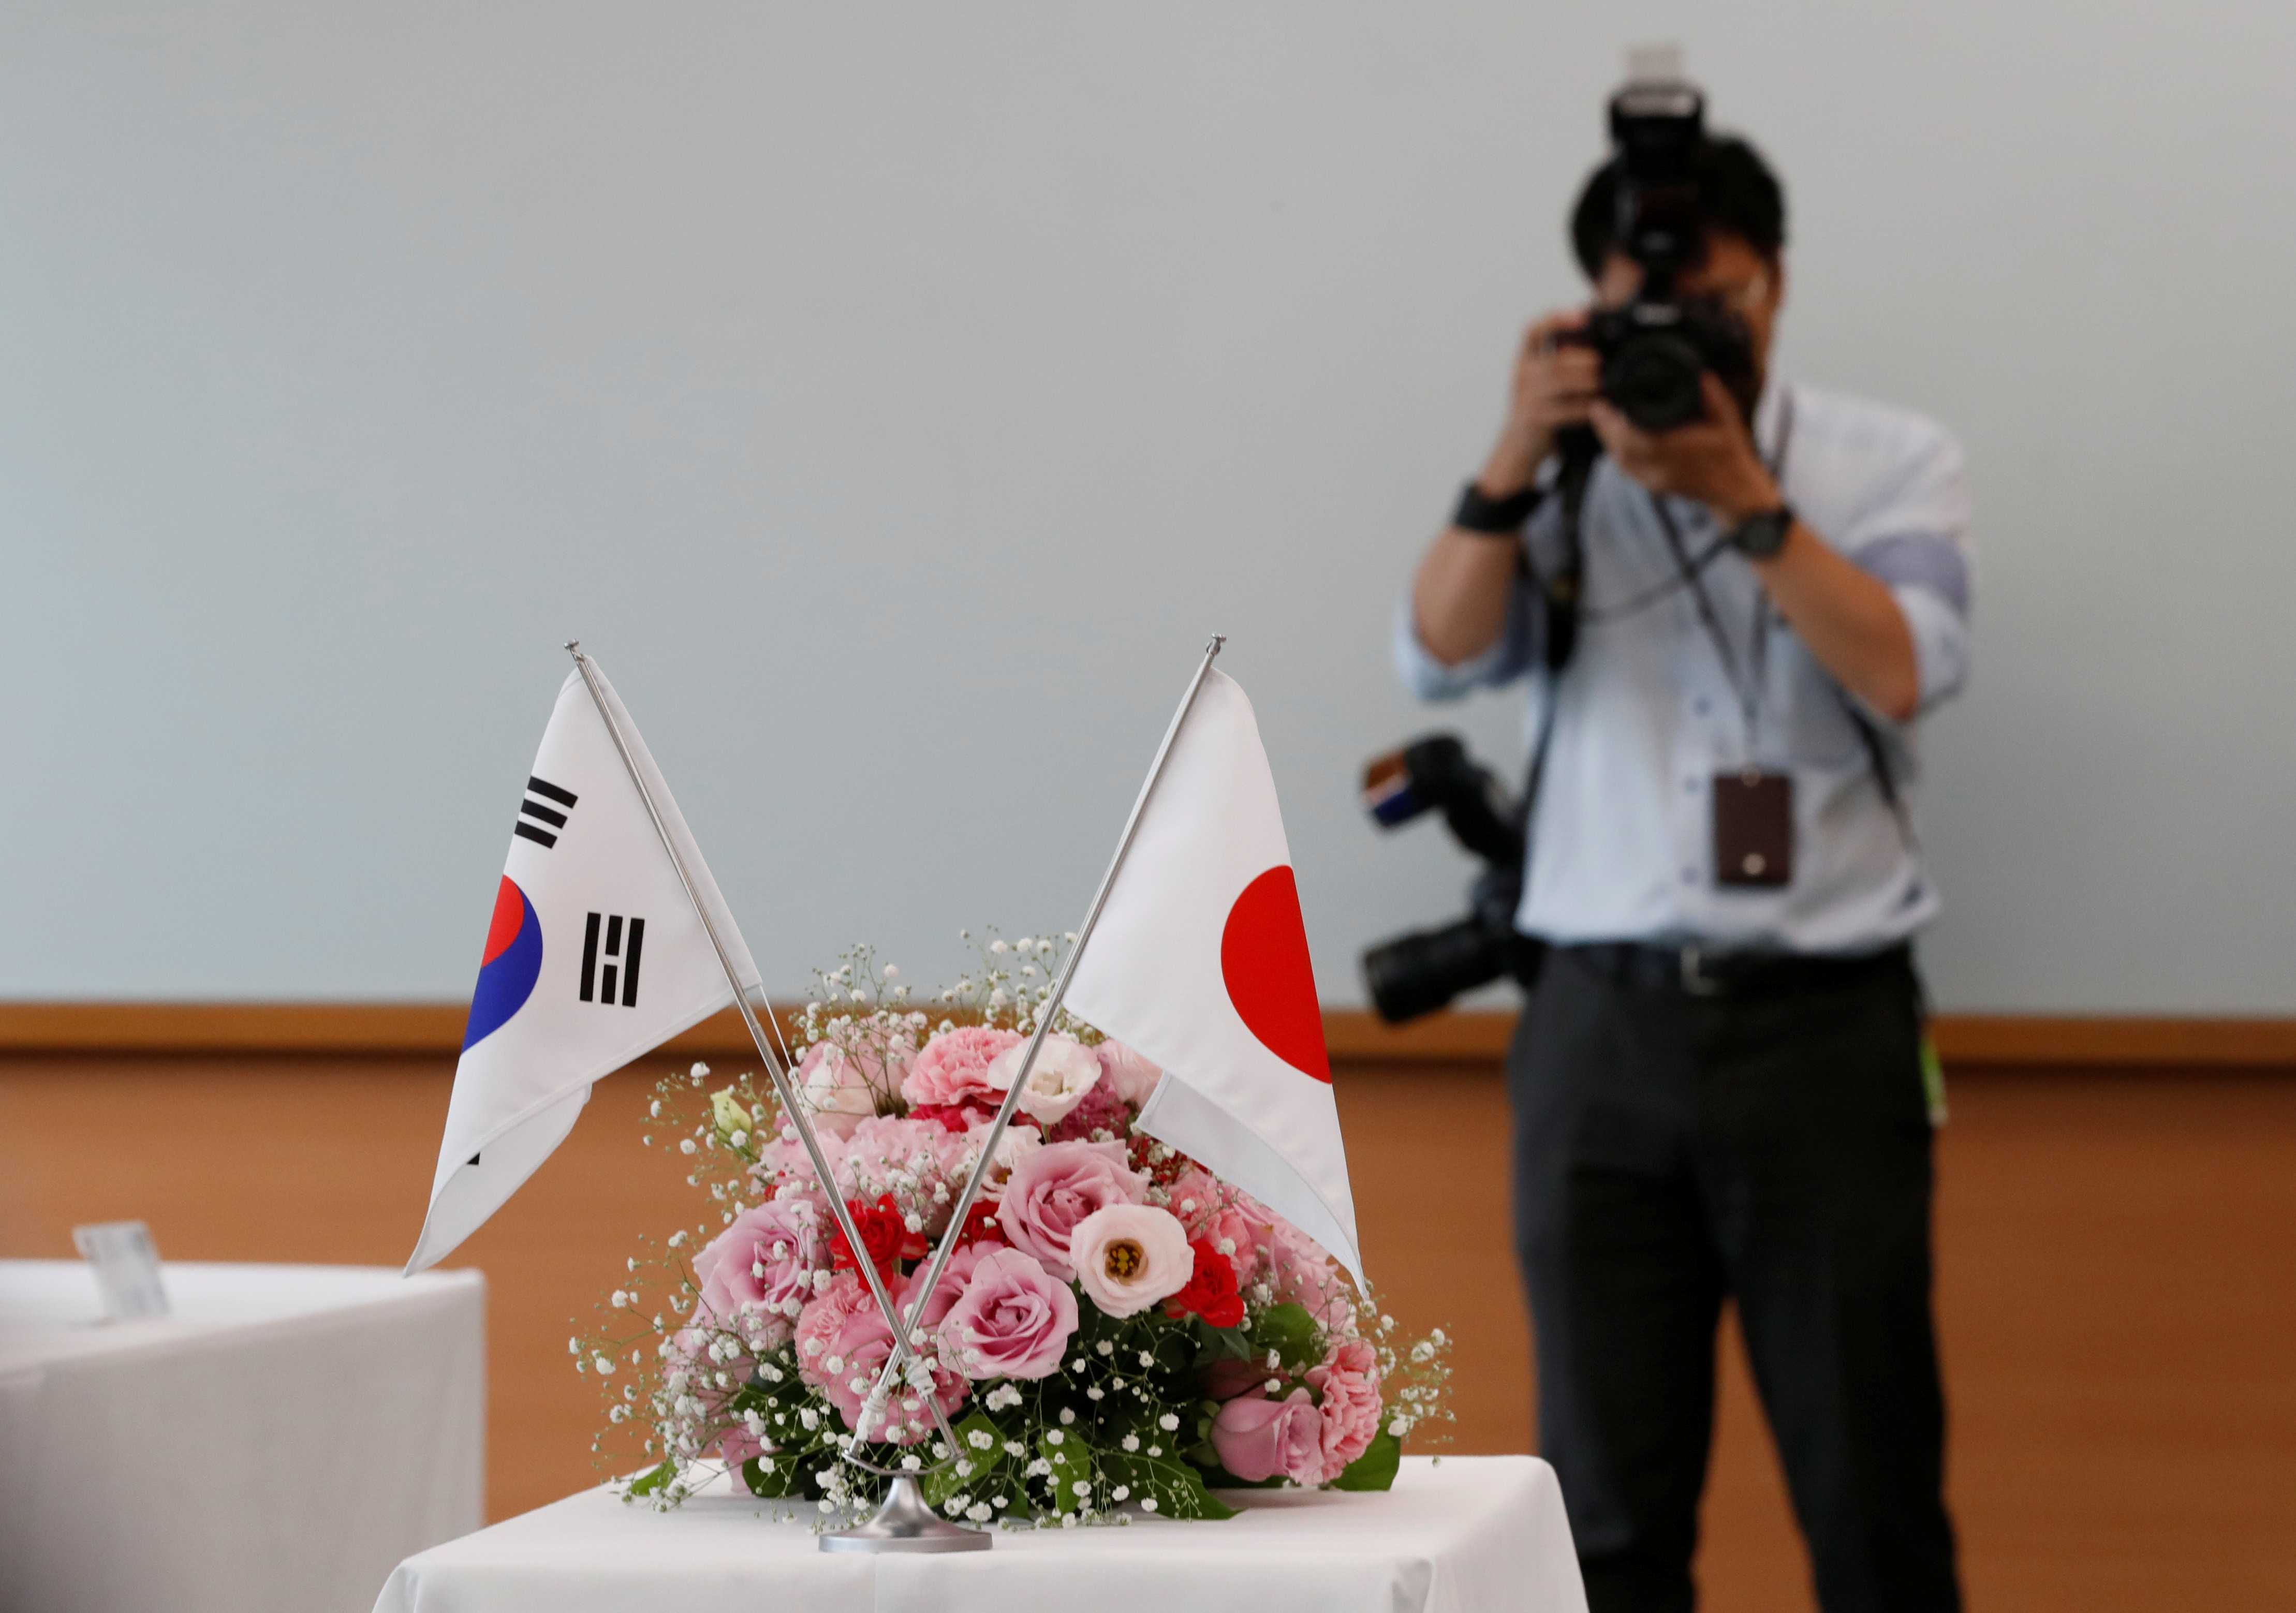 National flags of South Korea and Japan are displayed during a meeting between Komeito Party members and South Korean lawmakers at Komeito Party's headquarters in Tokyo